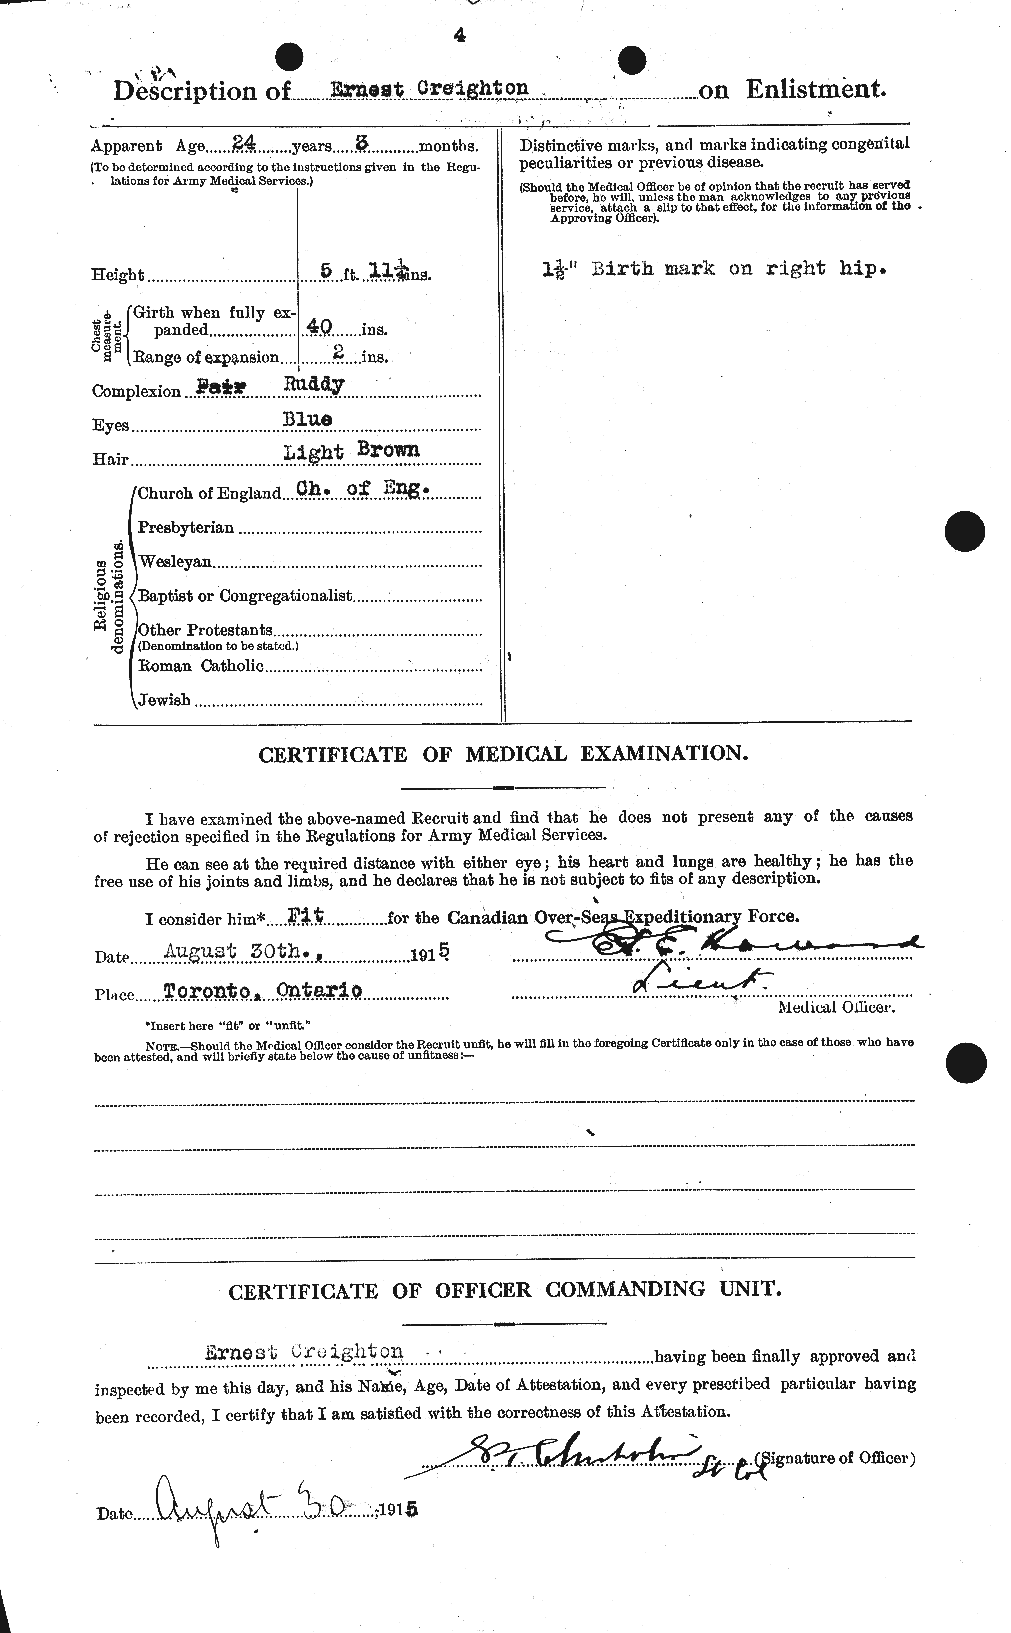 Personnel Records of the First World War - CEF 063207b